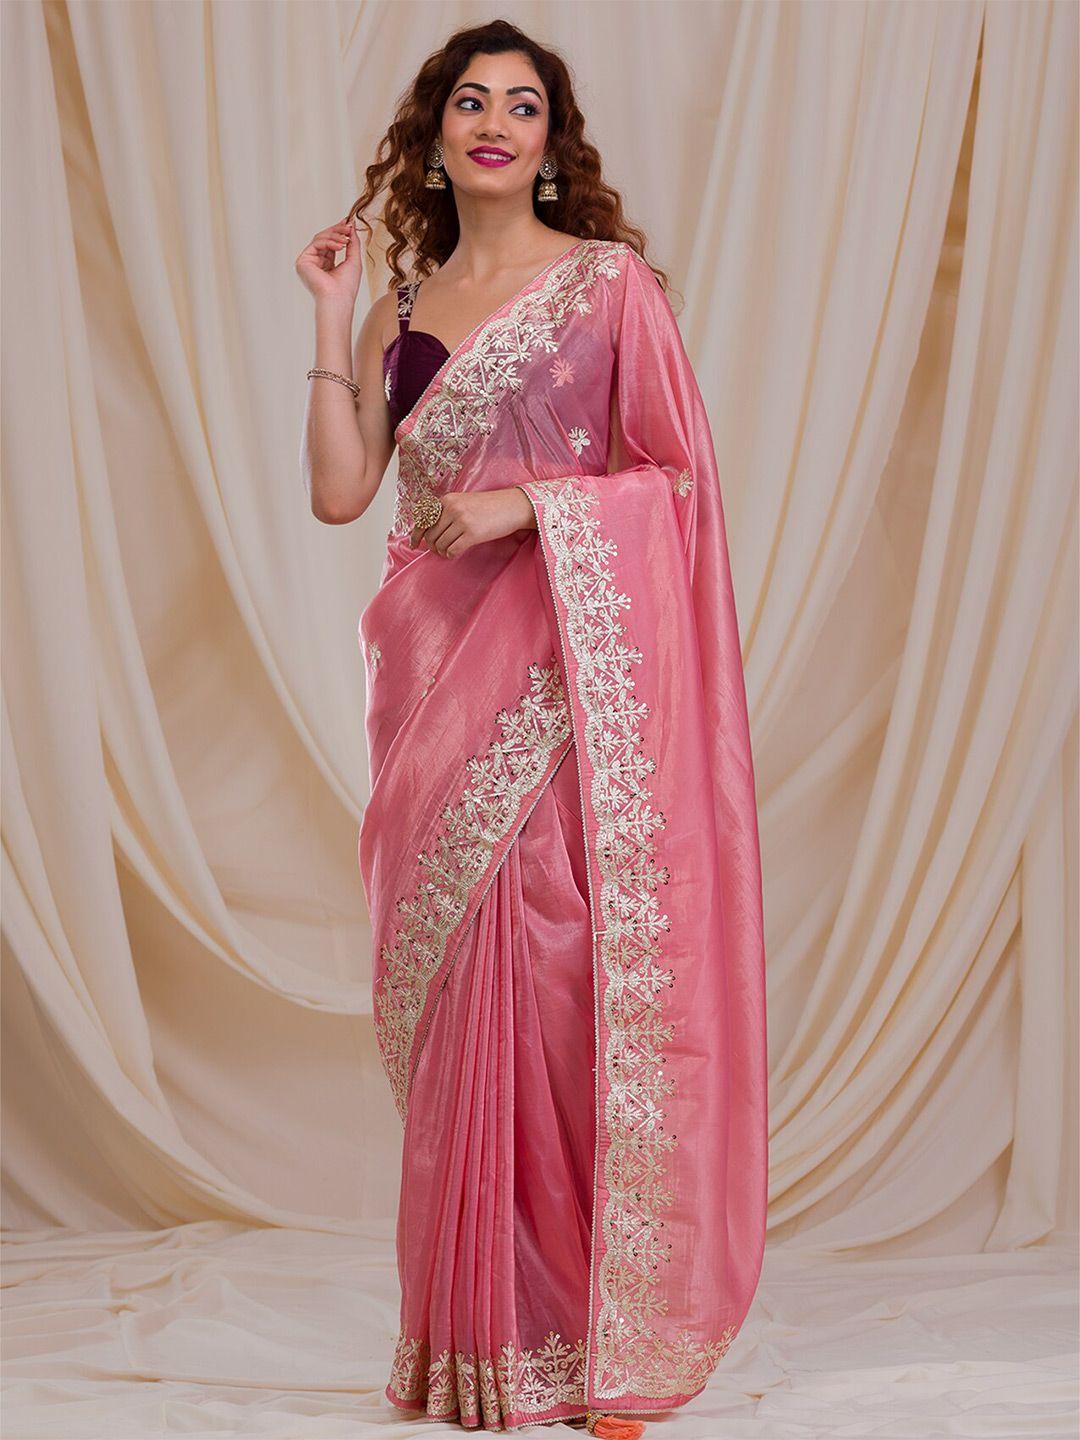 koskii floral embroidered sequinned tissue saree